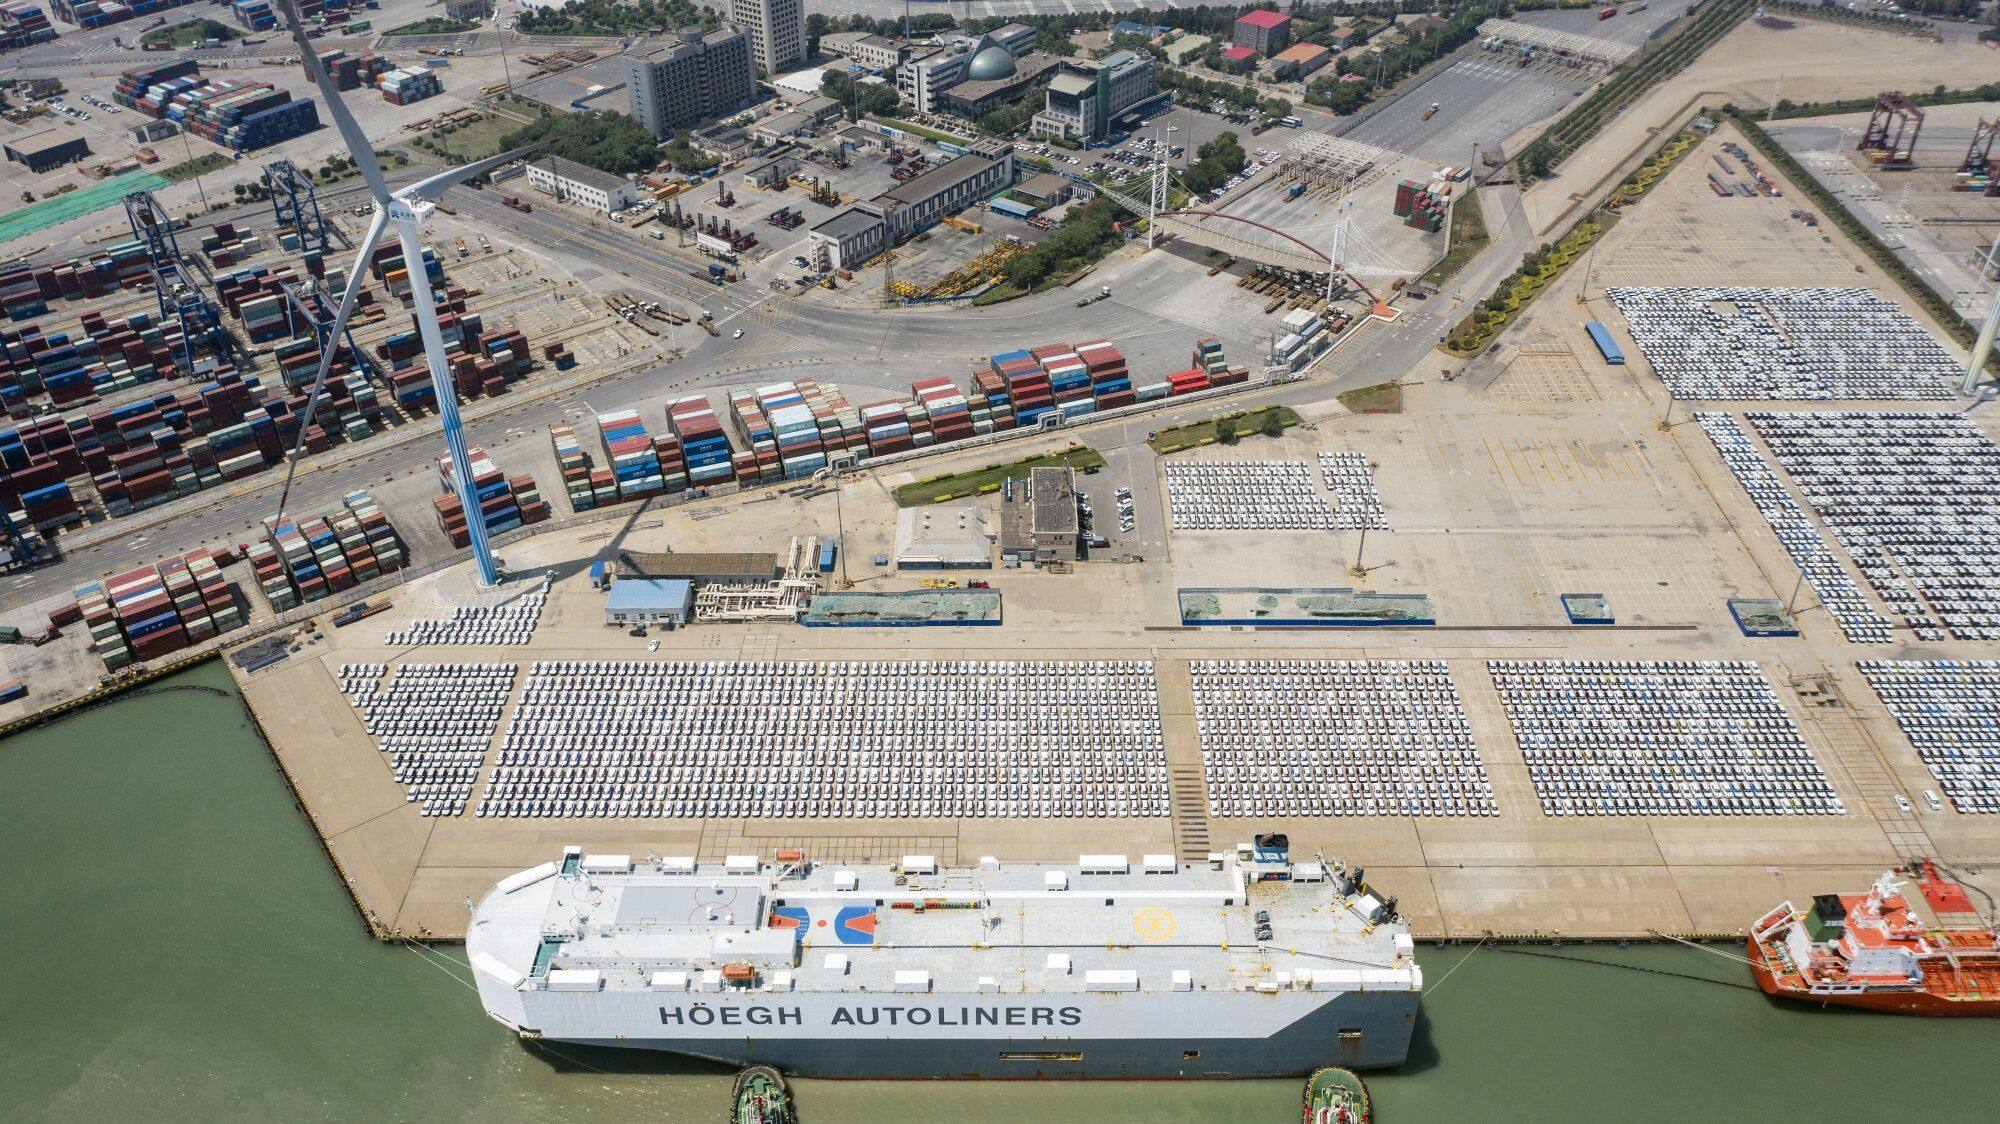 Vehicles at a yard near Tianjin port in China on June 30. China rolled out a number of measures to open up its free-trade zones as state leaders go on a charm offensive to woo foreign investors. Photo: Bloomberg